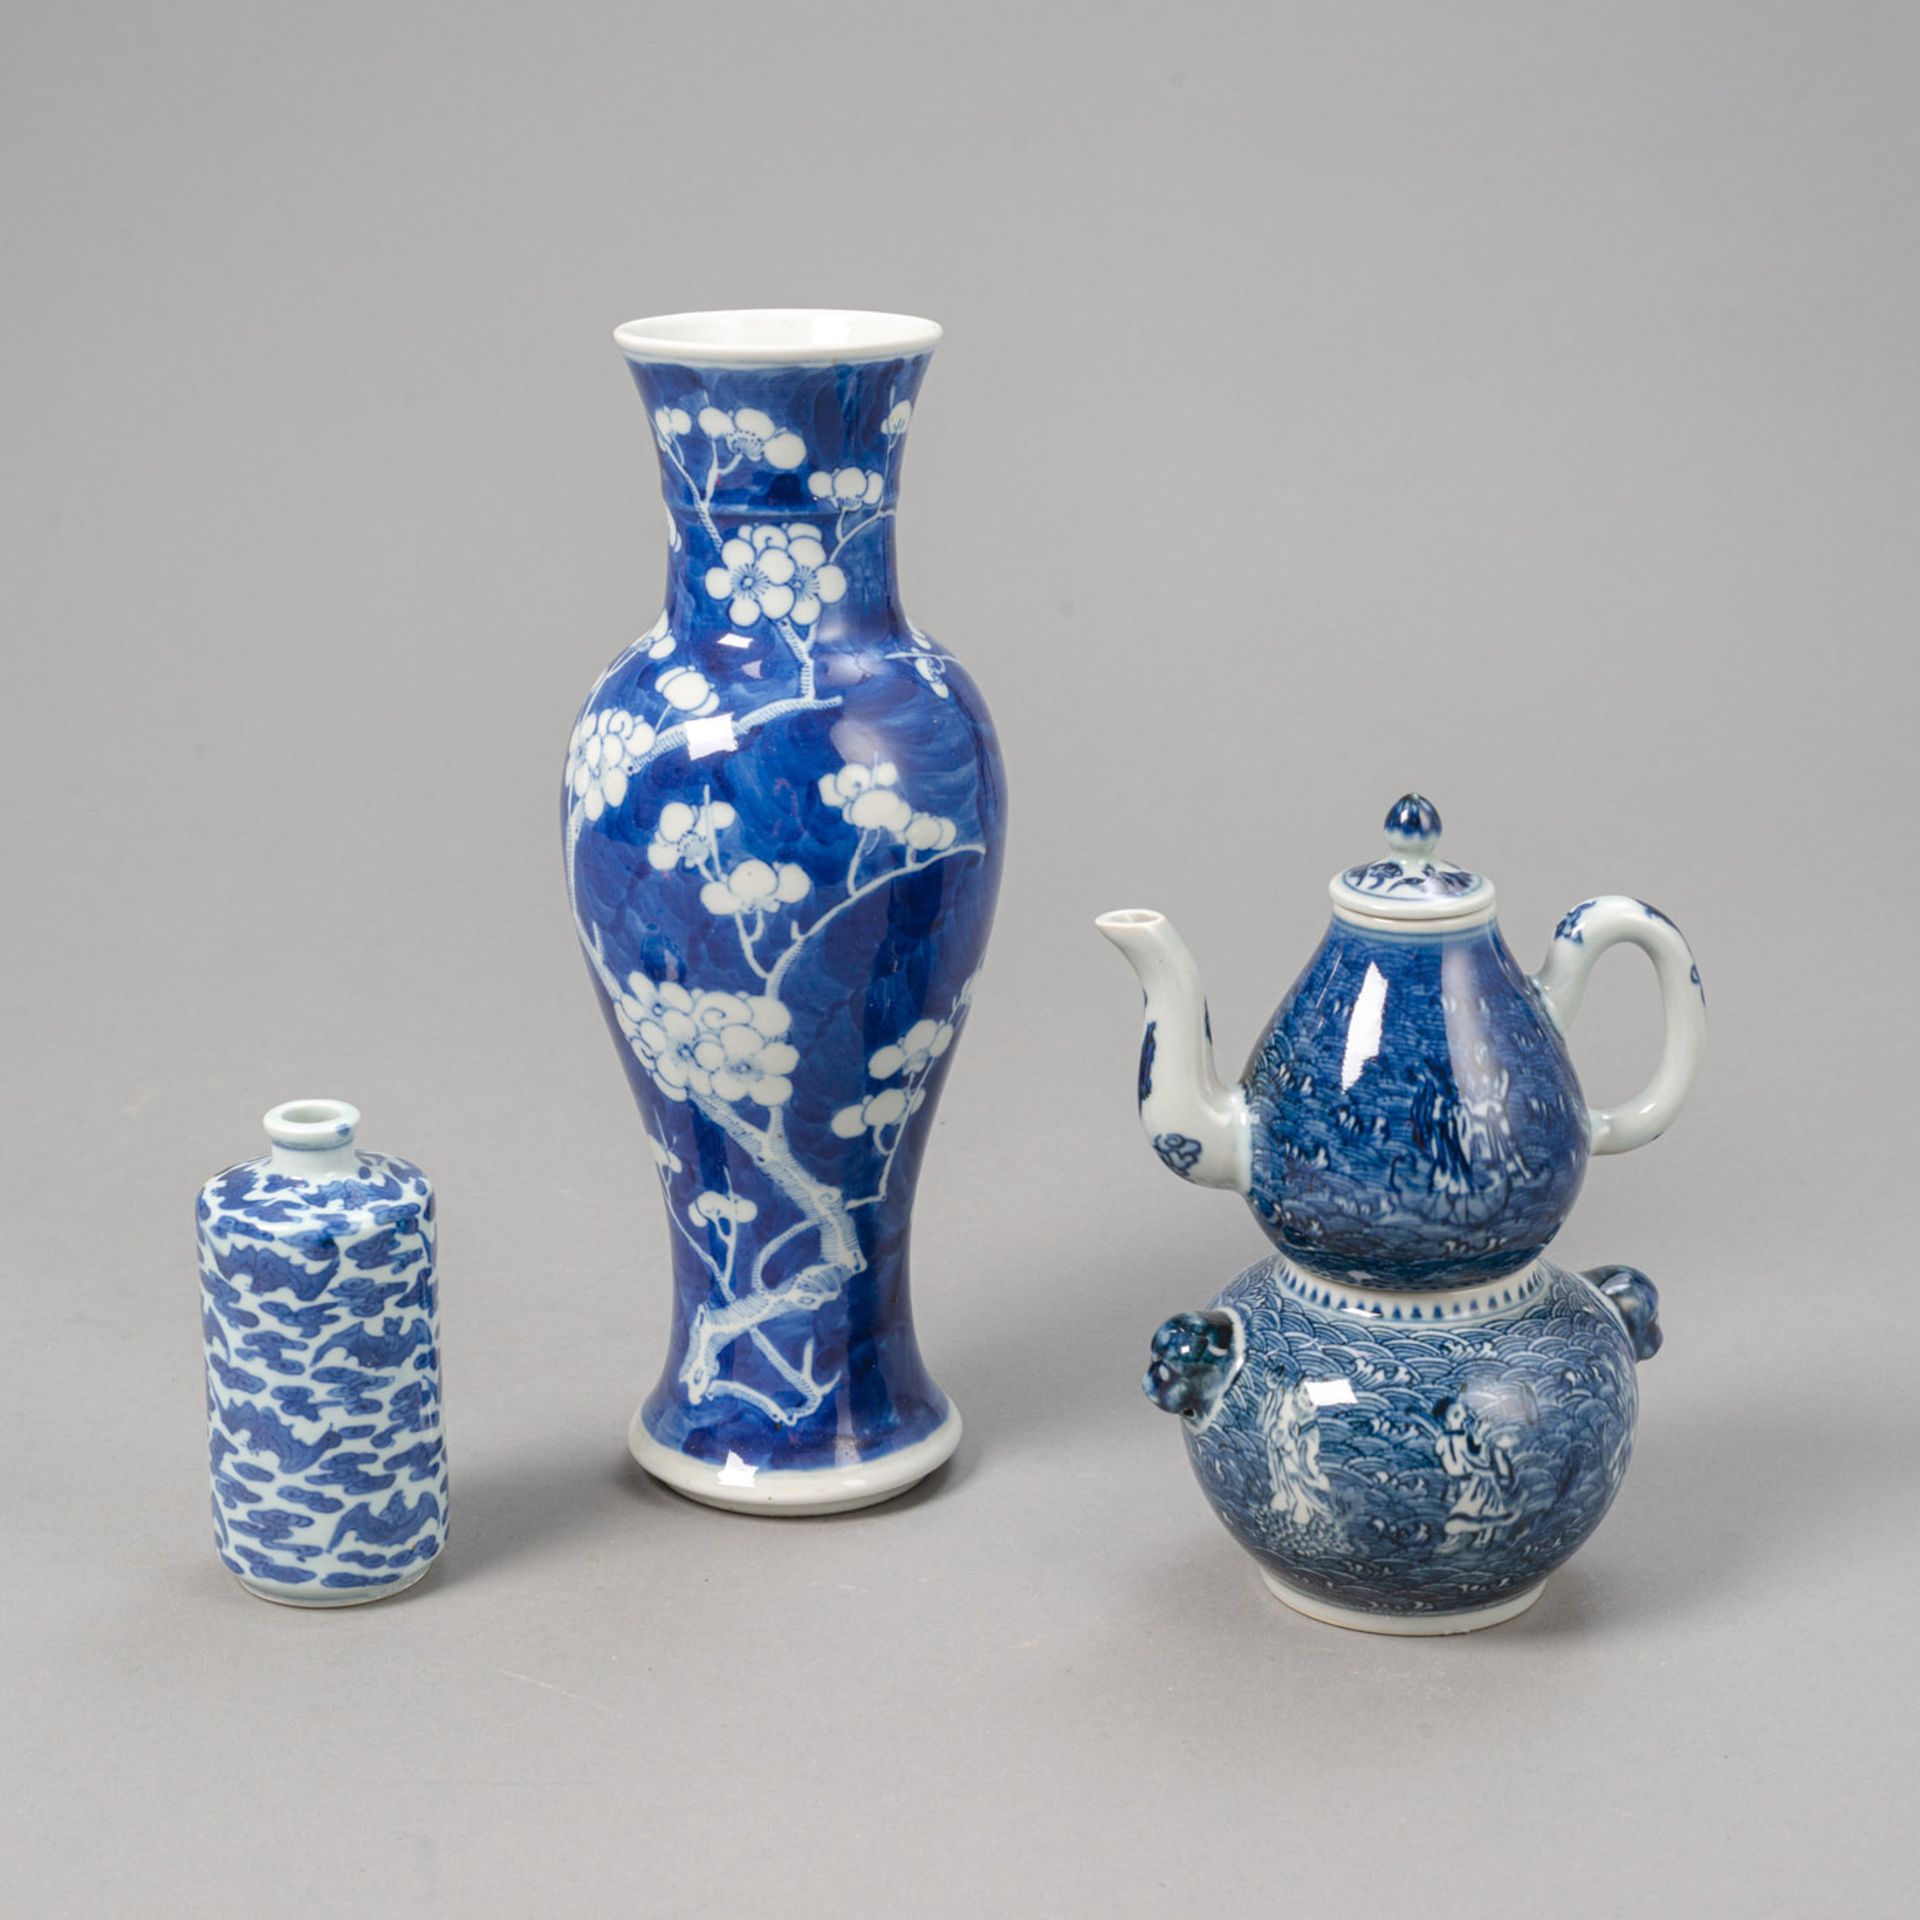 A TWO-PART BLUE AND WHITE PORCELAIN EWER, A SNUFF BOTTLE, AND A VASE